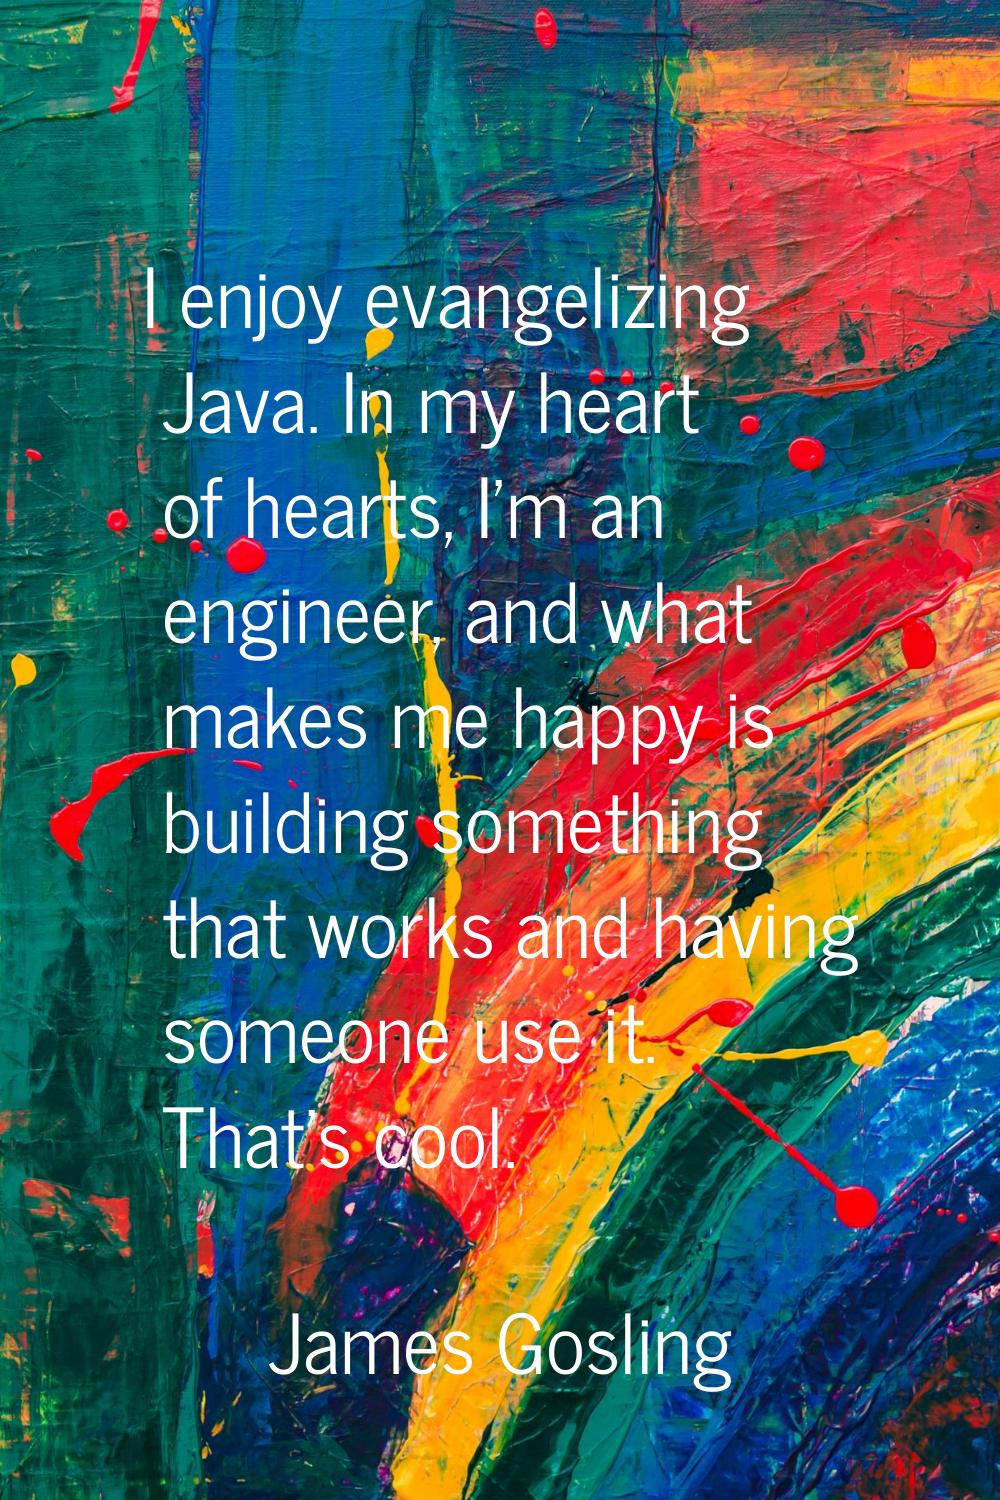 I enjoy evangelizing Java. In my heart of hearts, I'm an engineer, and what makes me happy is build